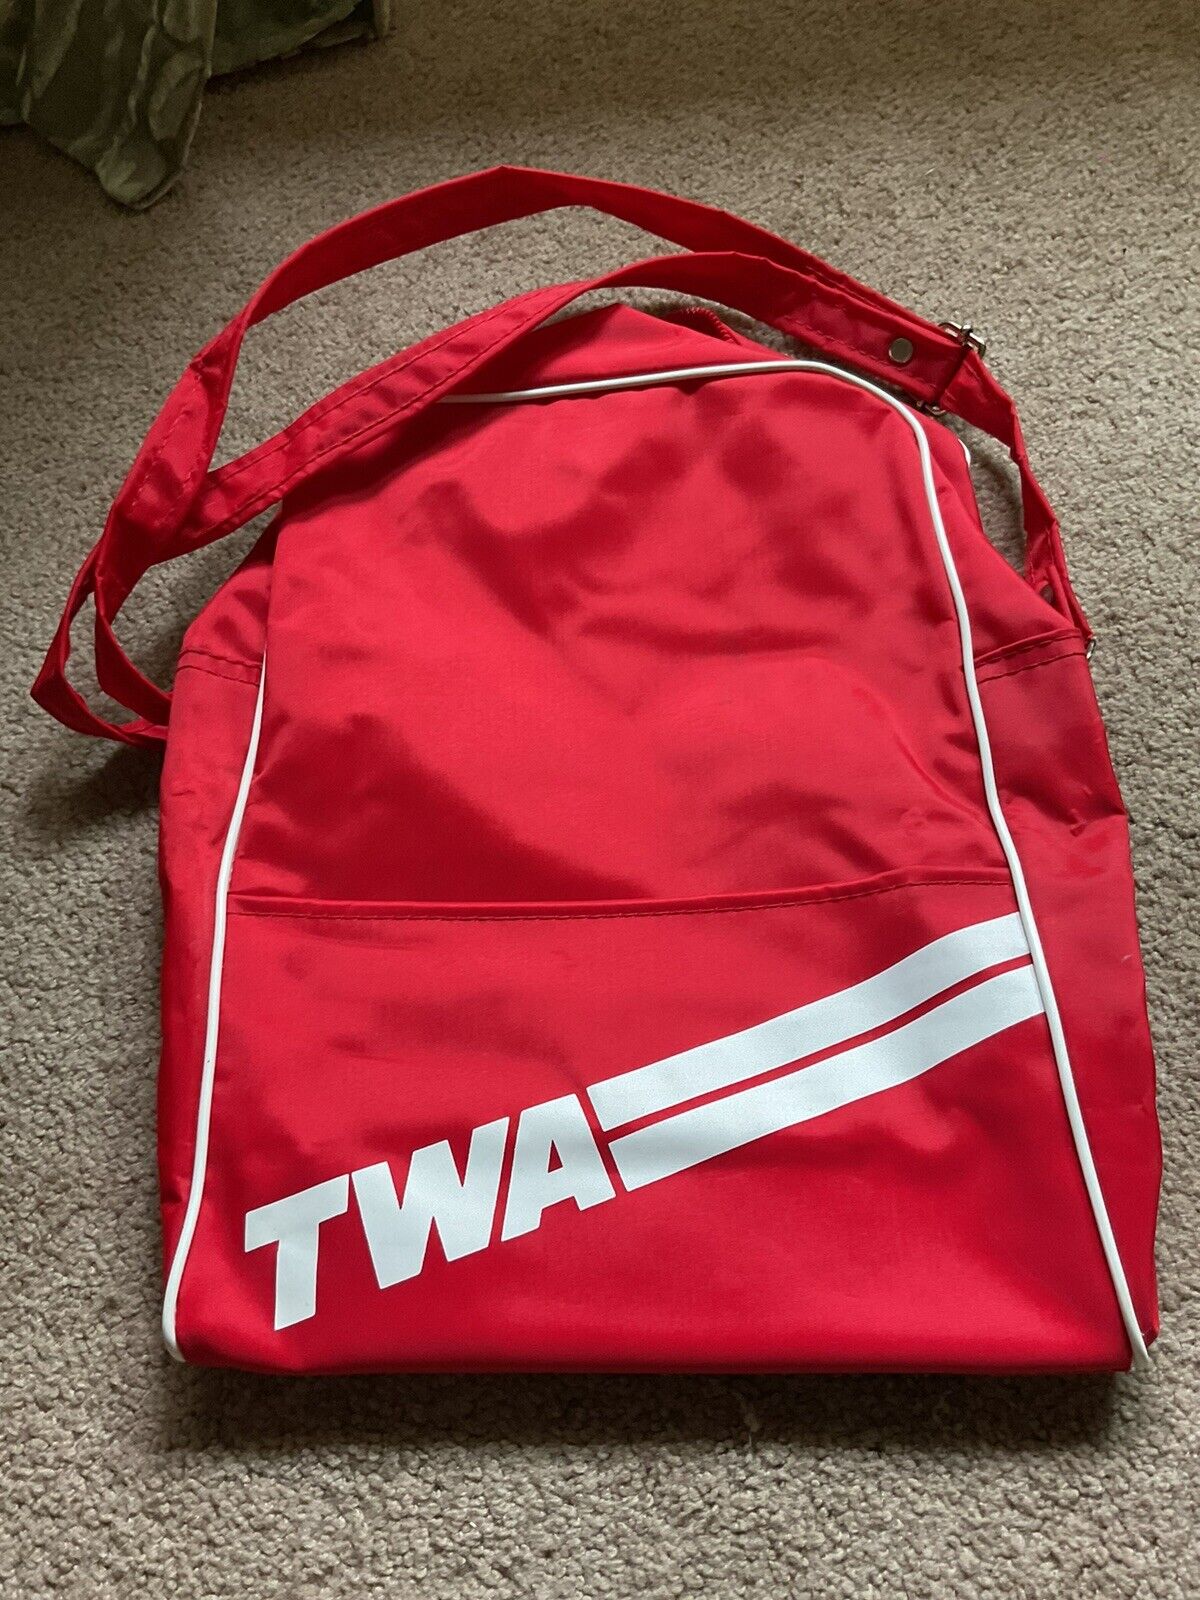 Vintage Airtex TWA Trans World Airlines Carry On Tote Travel Bag Red